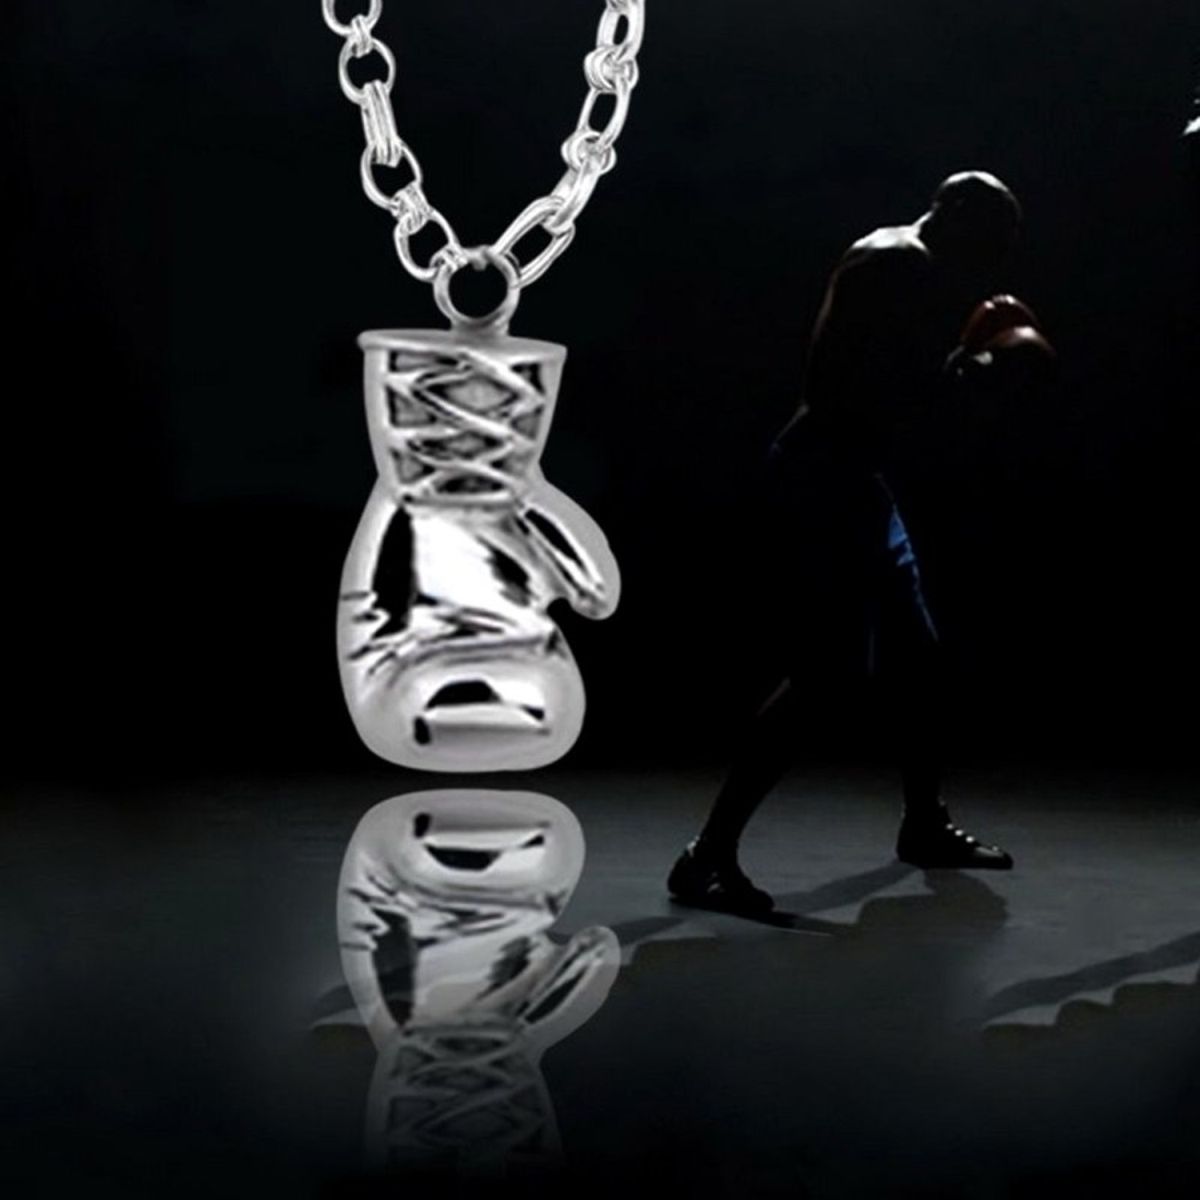 Glossy Boxing Glove Silver Rhodium Stainless Steel Pendant Chain